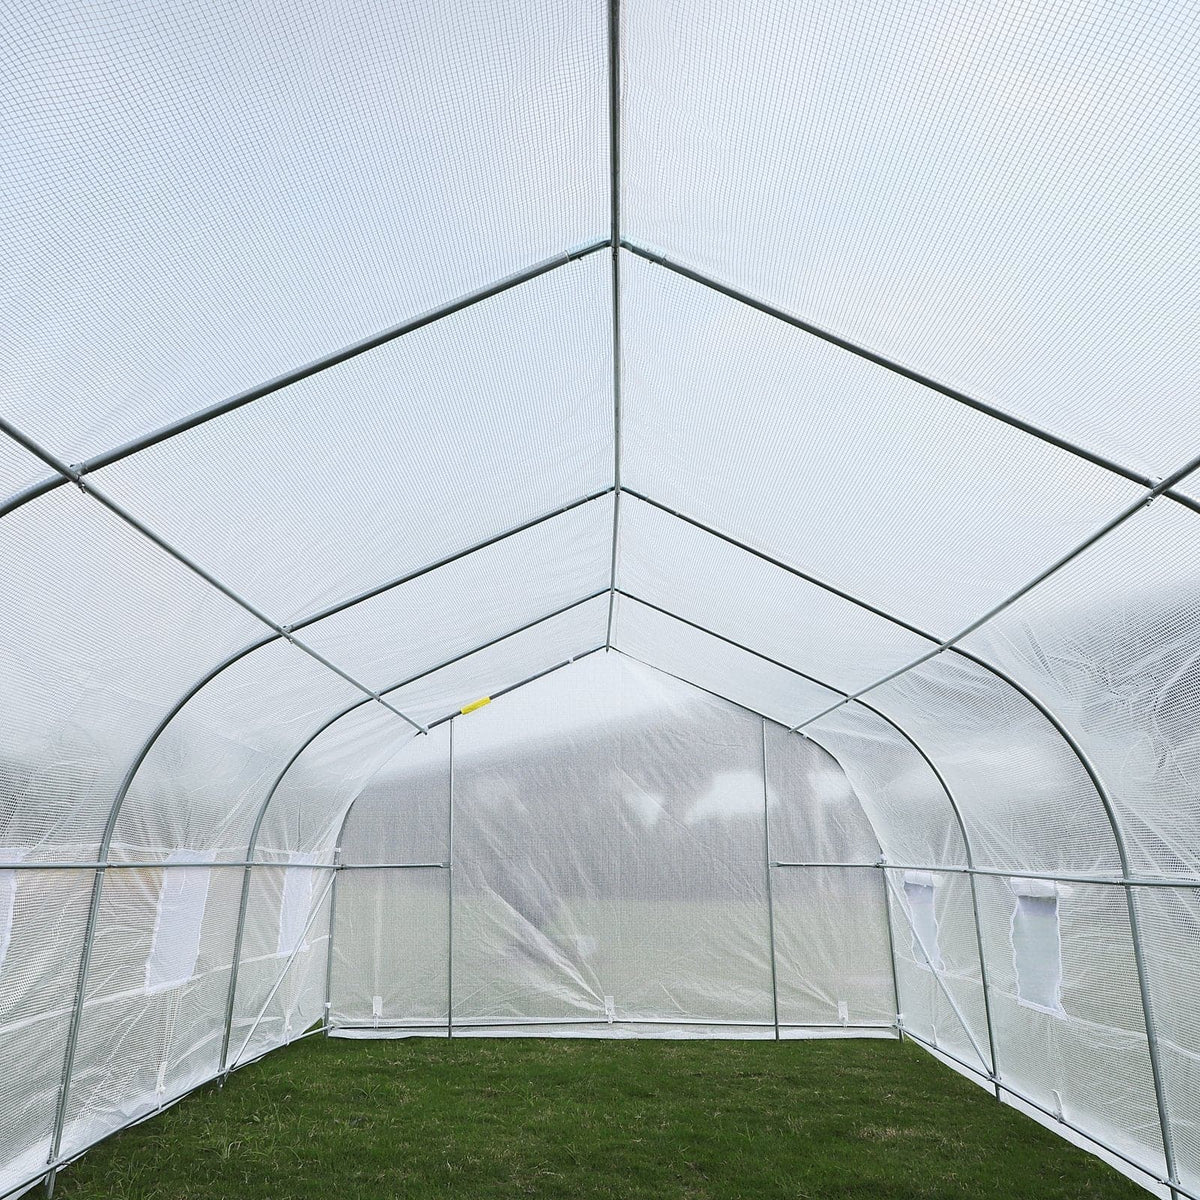 A greenhouse filled with lush plants and thriving crops, all protected by an Outsunny 20&#39; x 10&#39; x 7&#39; Deluxe High Tunnel Walk-in Garden Greenhouse Kit - White from Aosom.